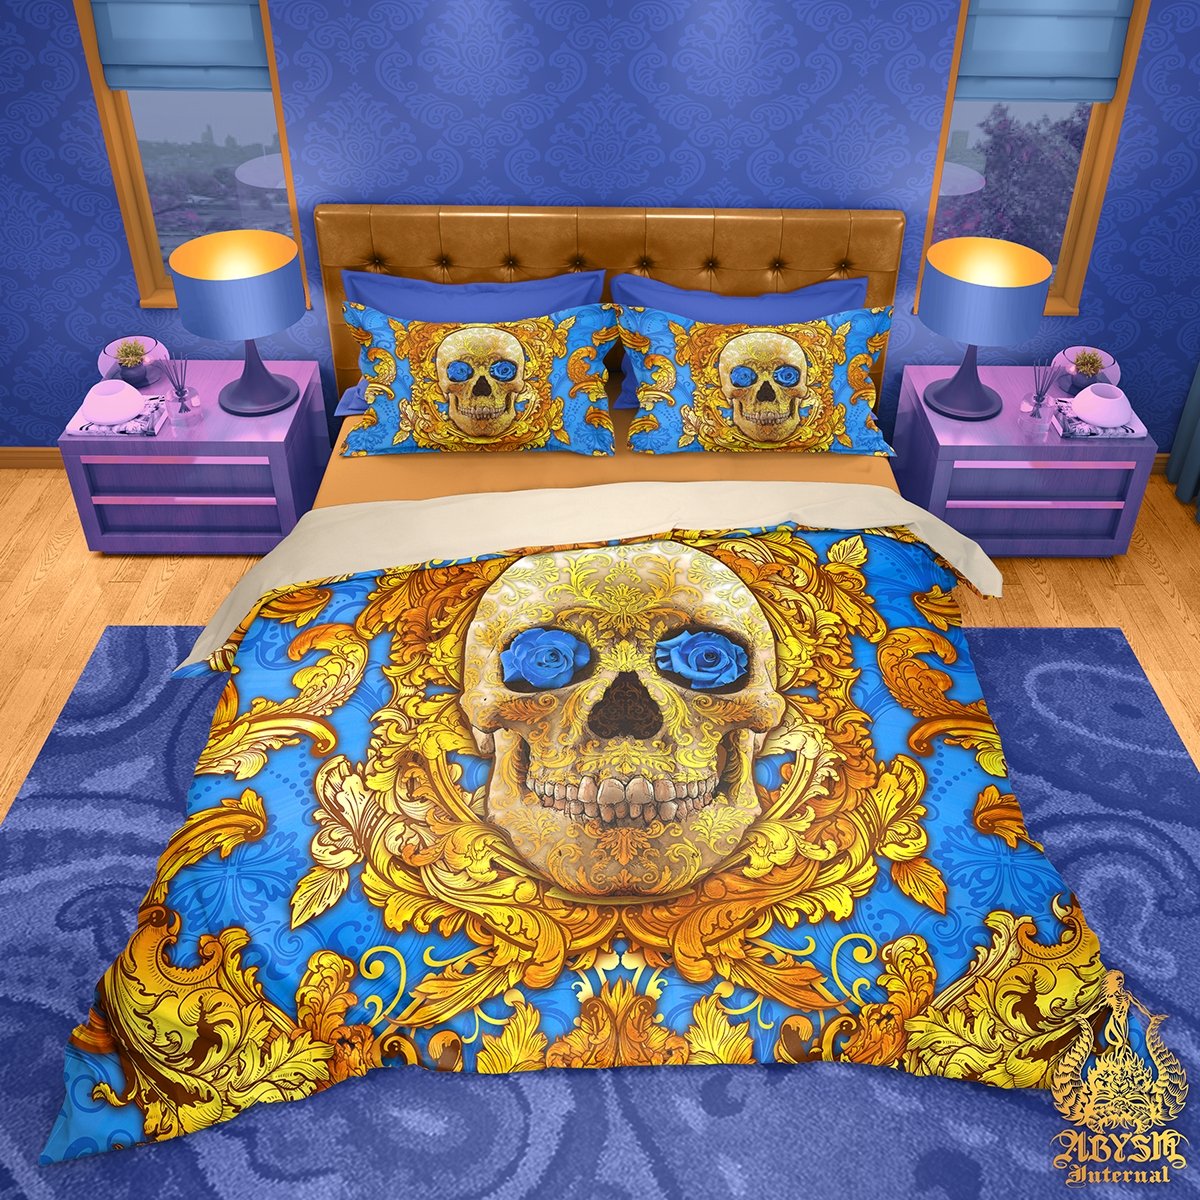 Skull Bedding Set, Comforter and Duvet, Vintage and Victorian Bed Cover and Bedroom Decor, King, Queen and Twin Size - Cyan and Gold - Abysm Internal